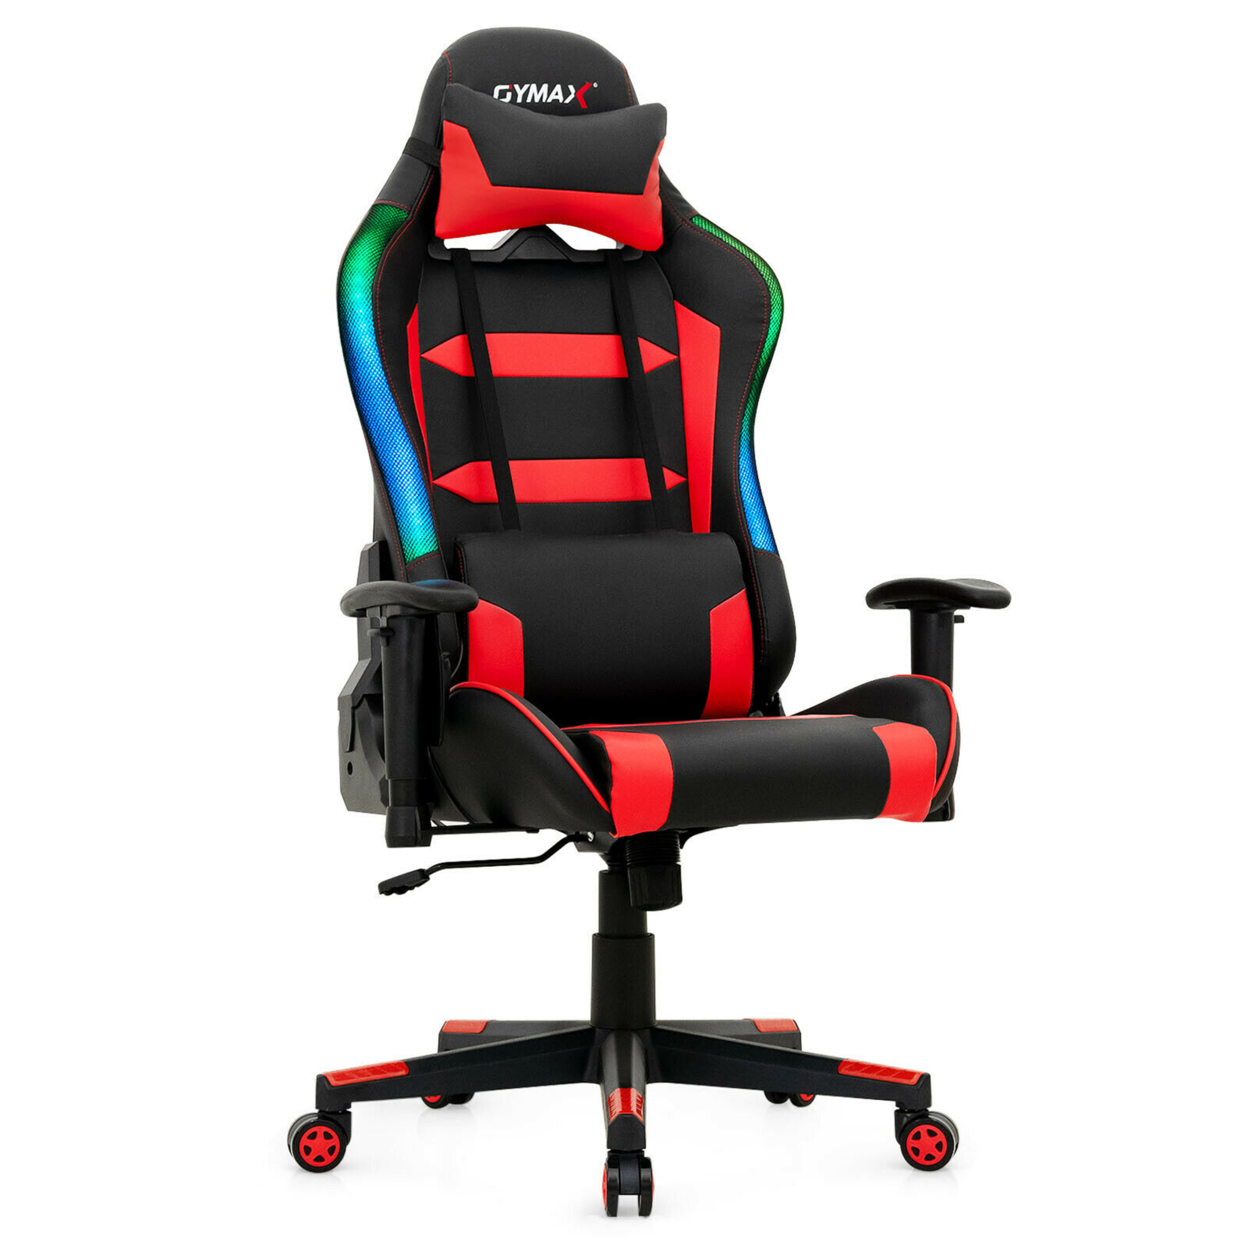 Gaming Chair Adjustable Swivel Computer Chair W/ LED Lights & Remote - Black + Red